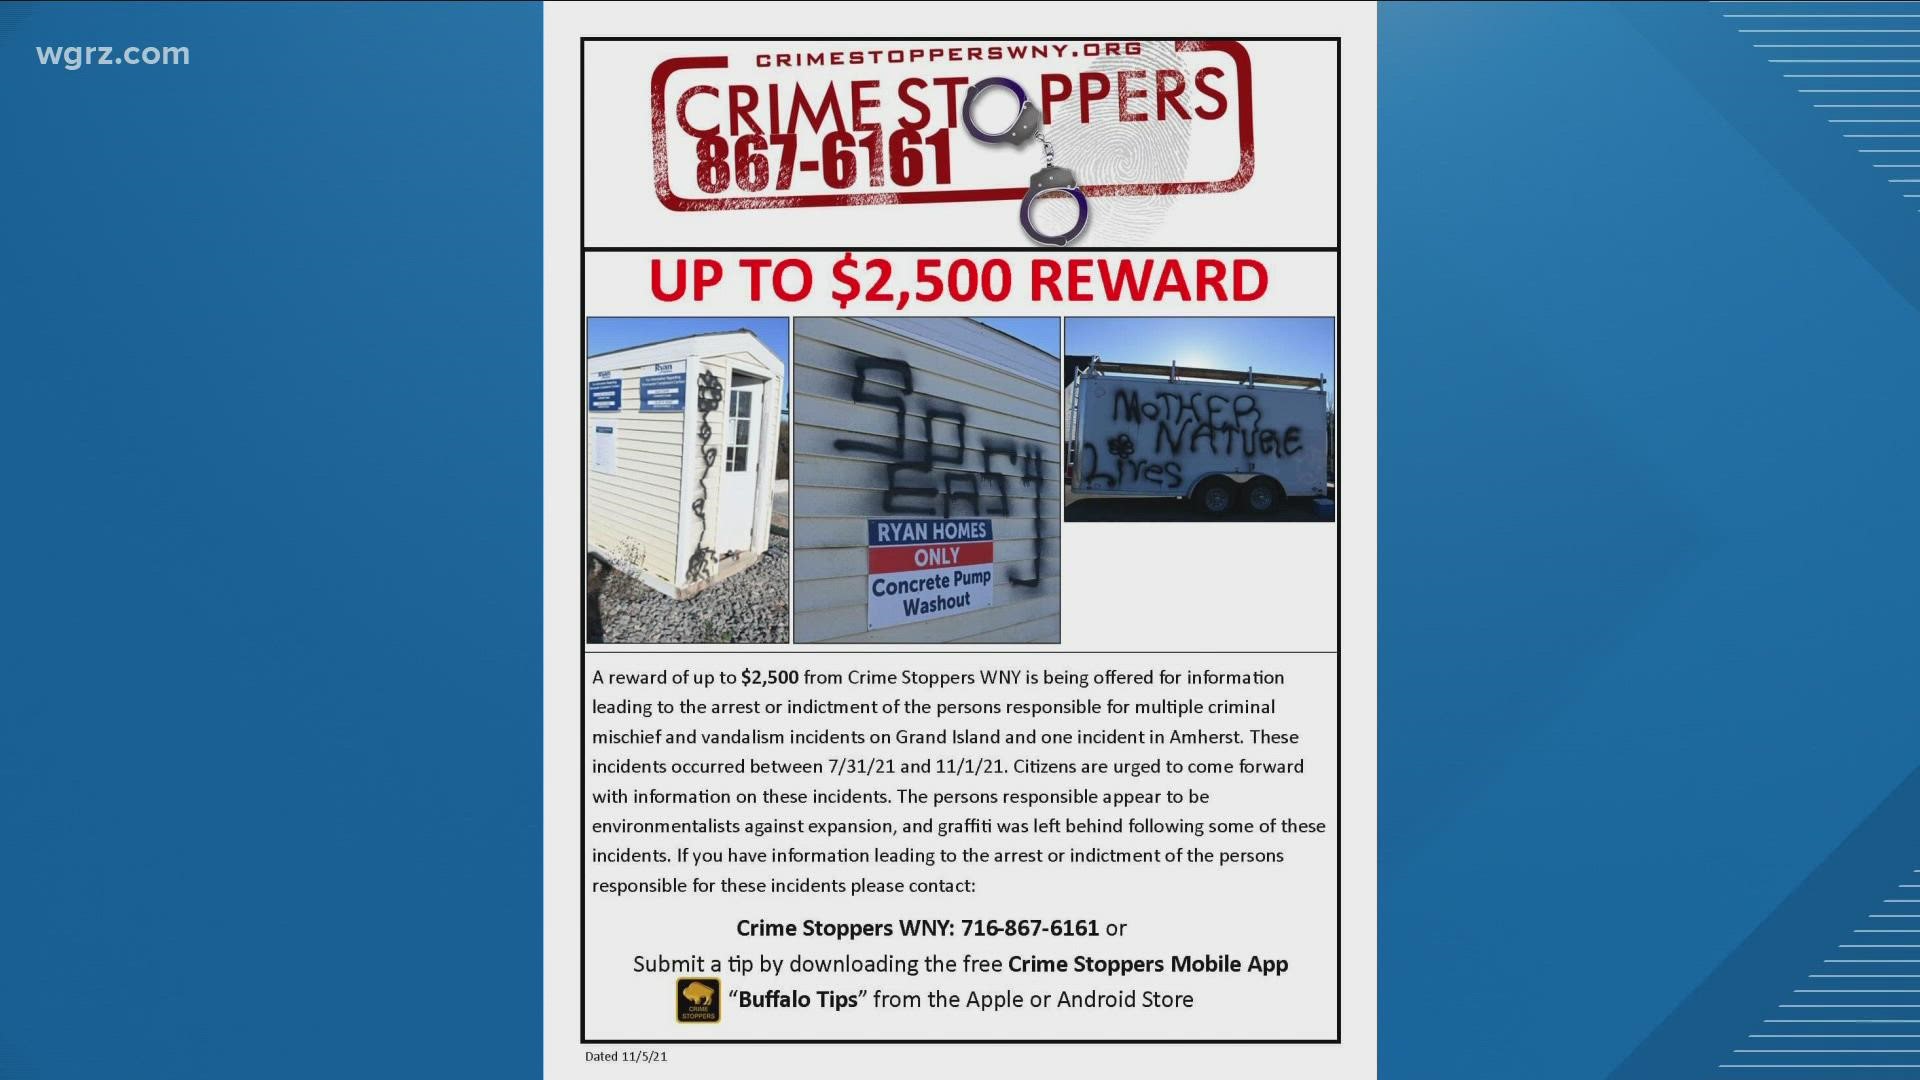 A reward of up to $2,500 is being offered.